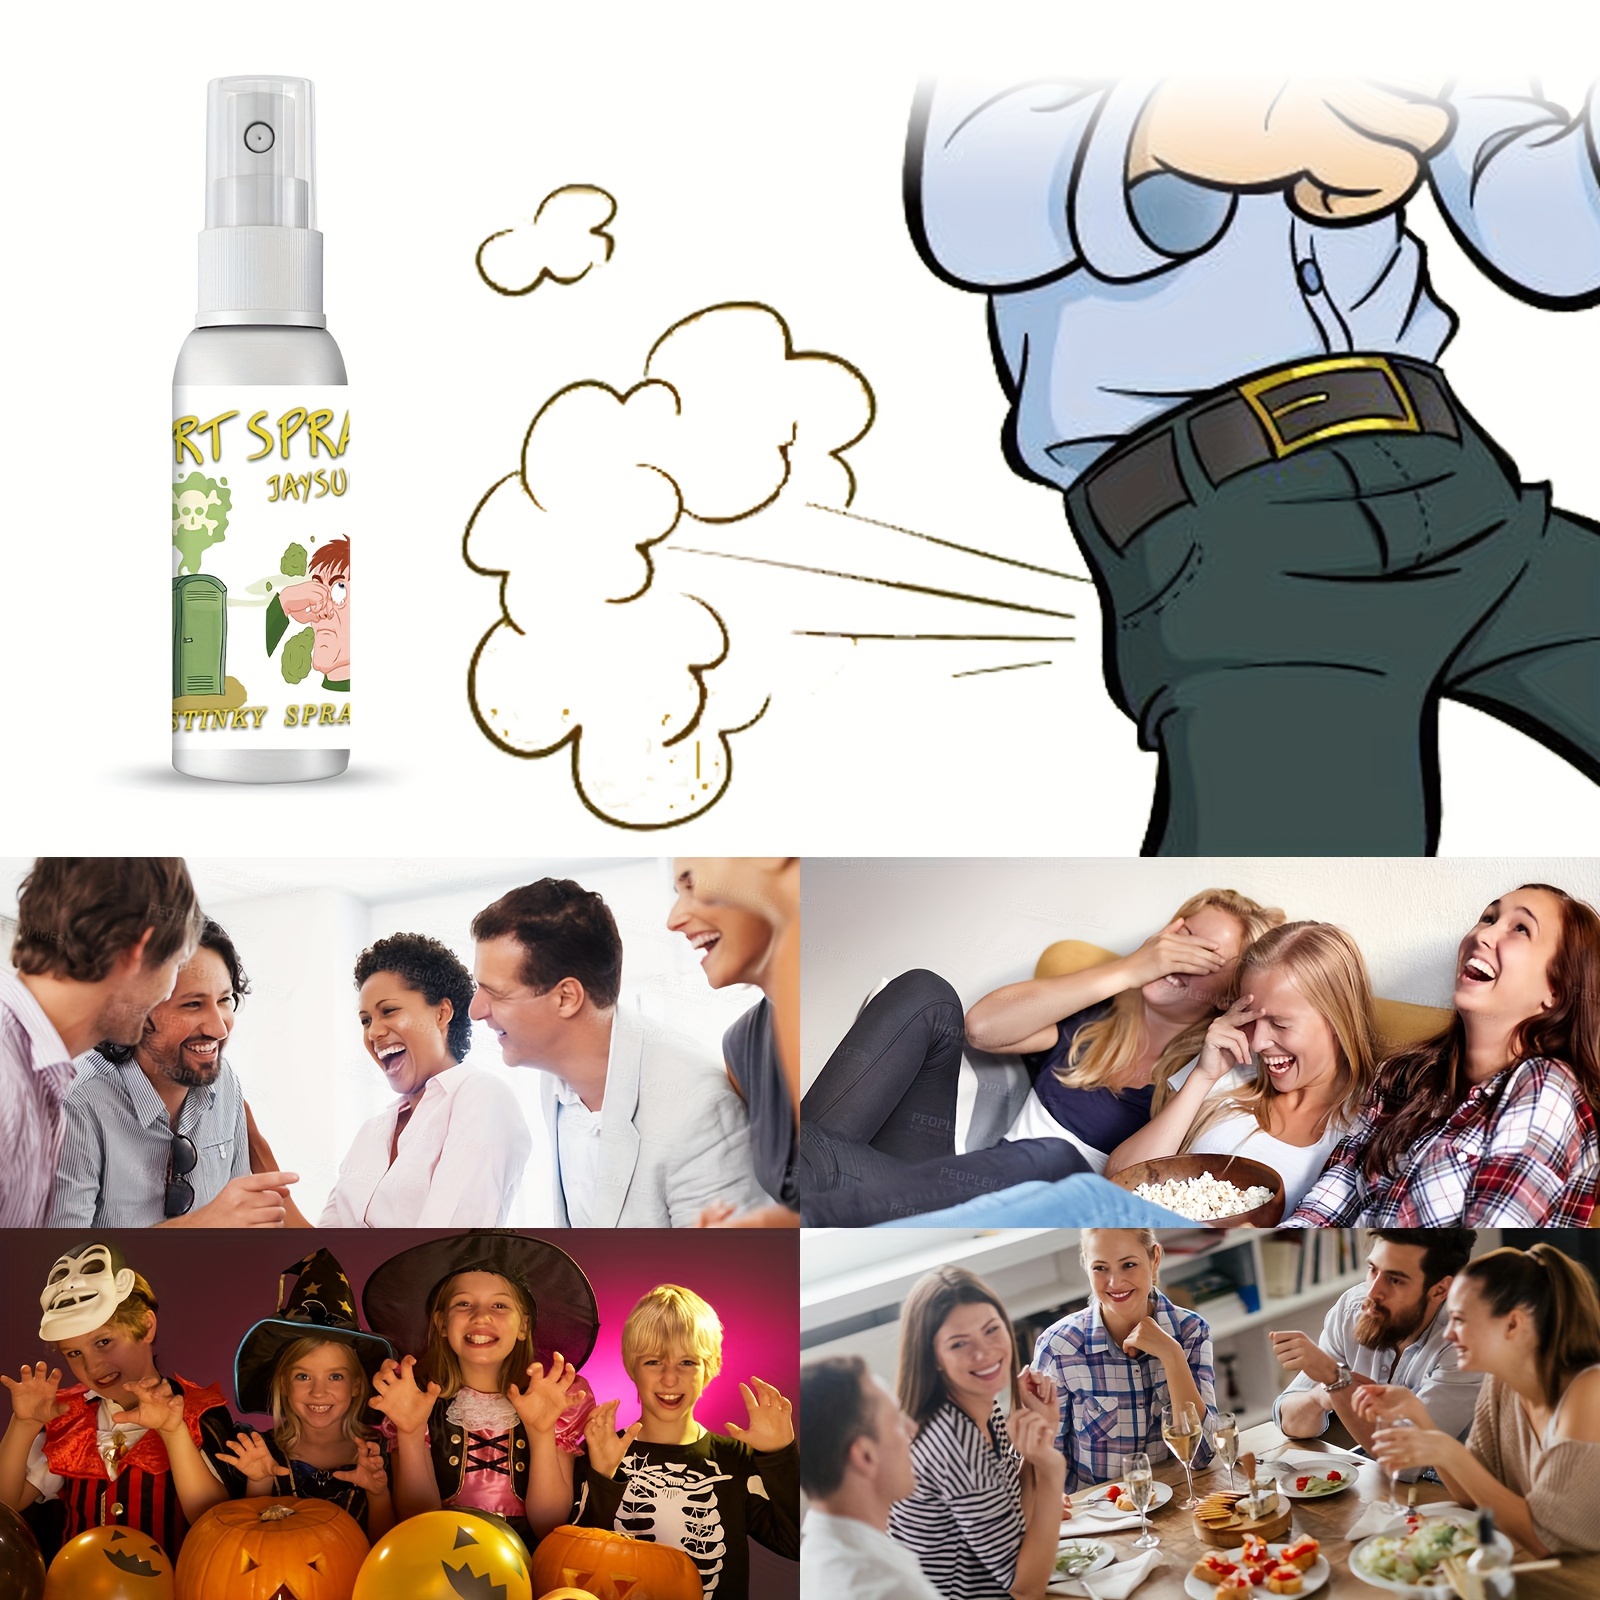 Liquid Ass: Prank Fart Spray, Gag Gift for Adults and Kids, Great